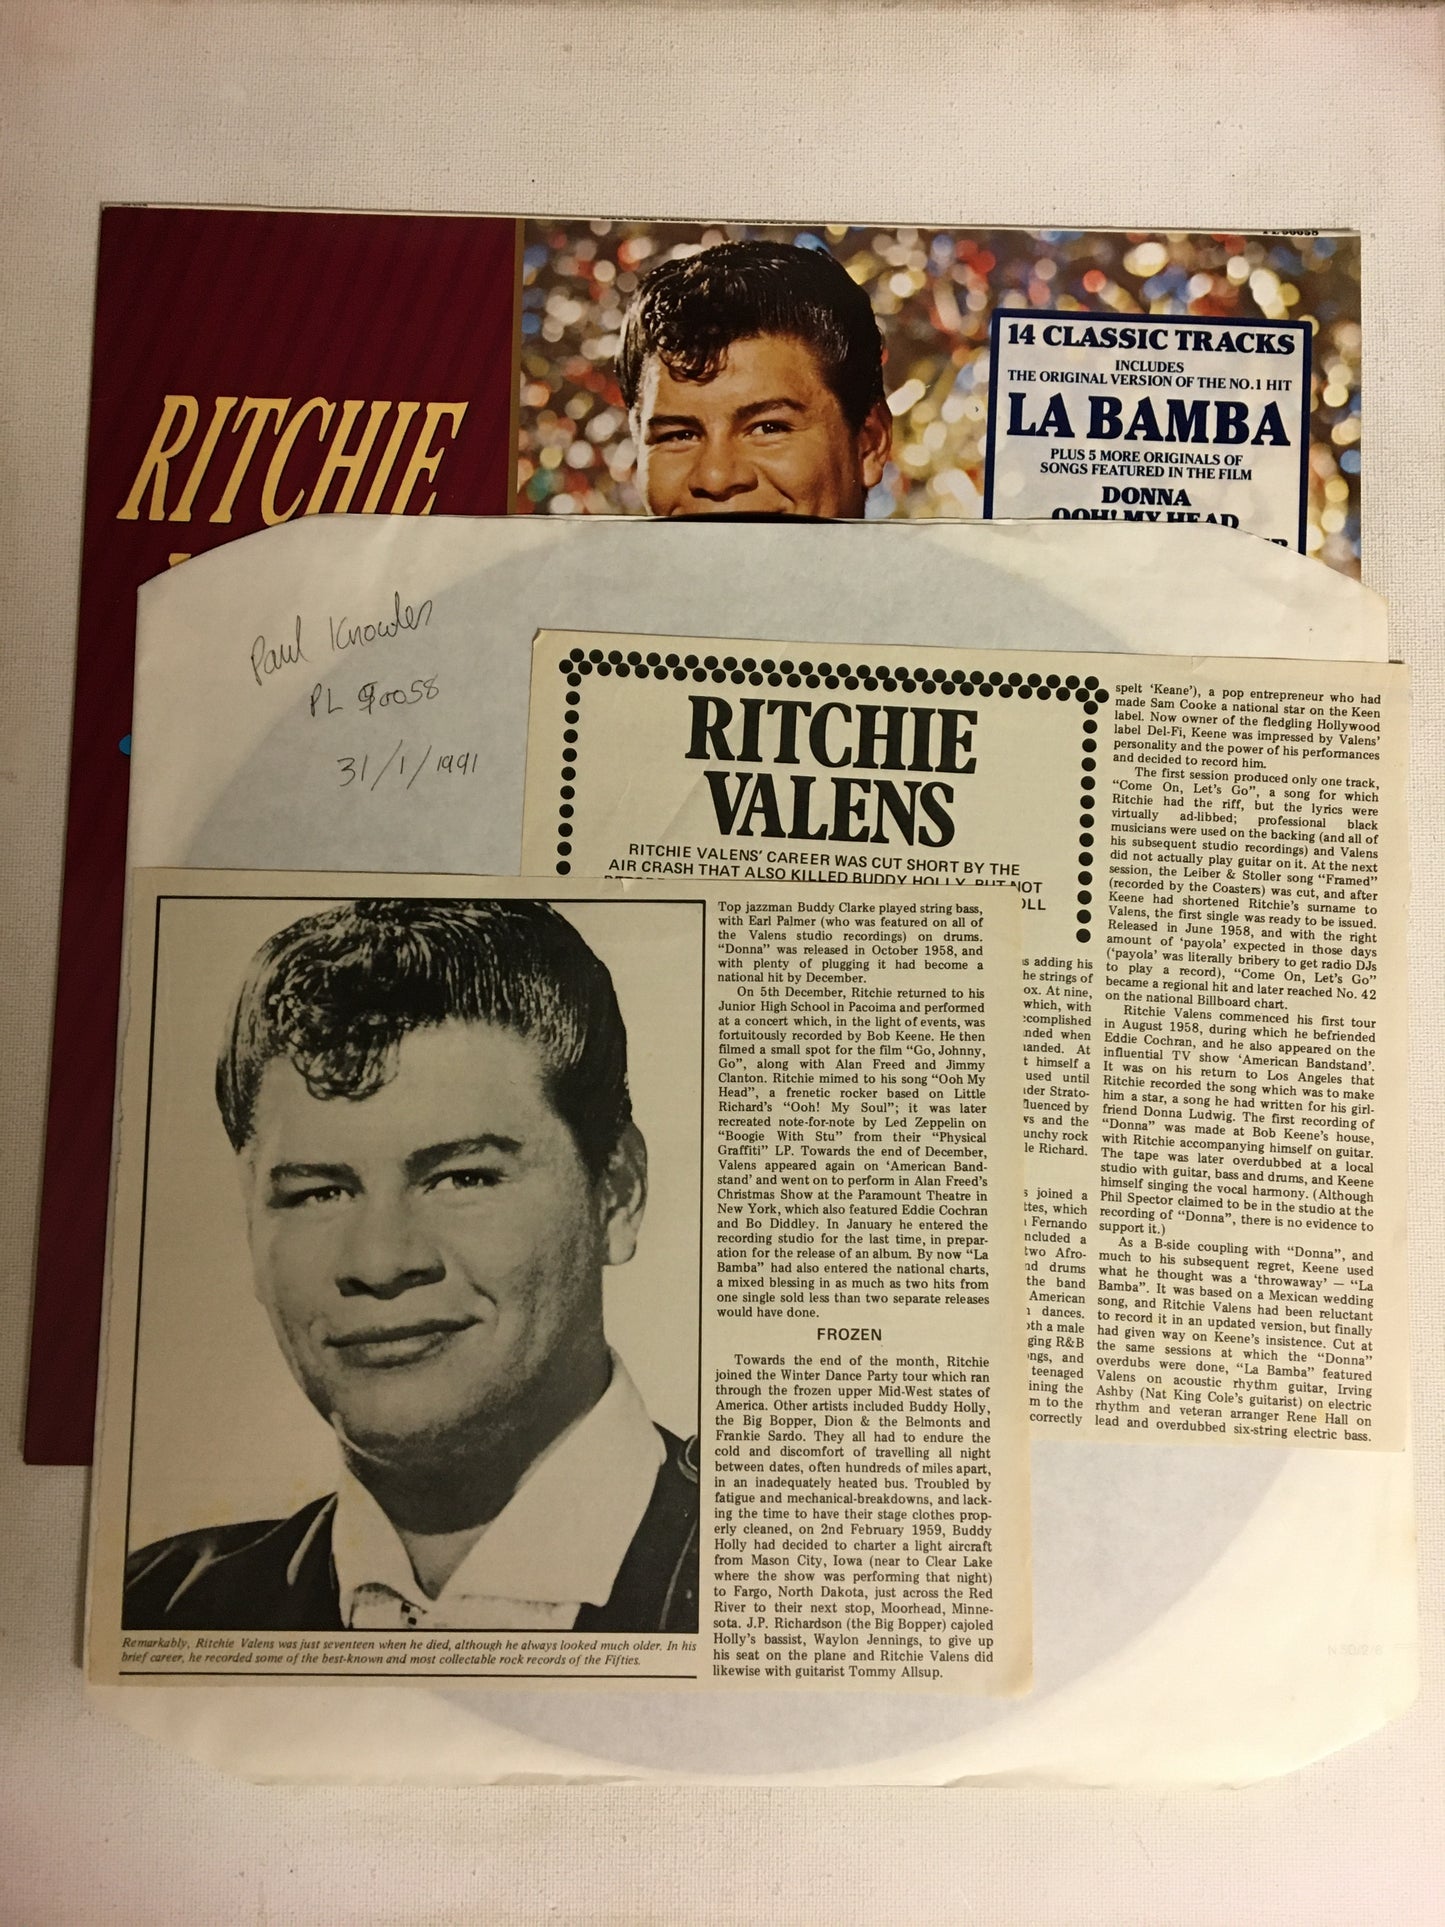 RITCHIE VALENS LP GREATEST HITS